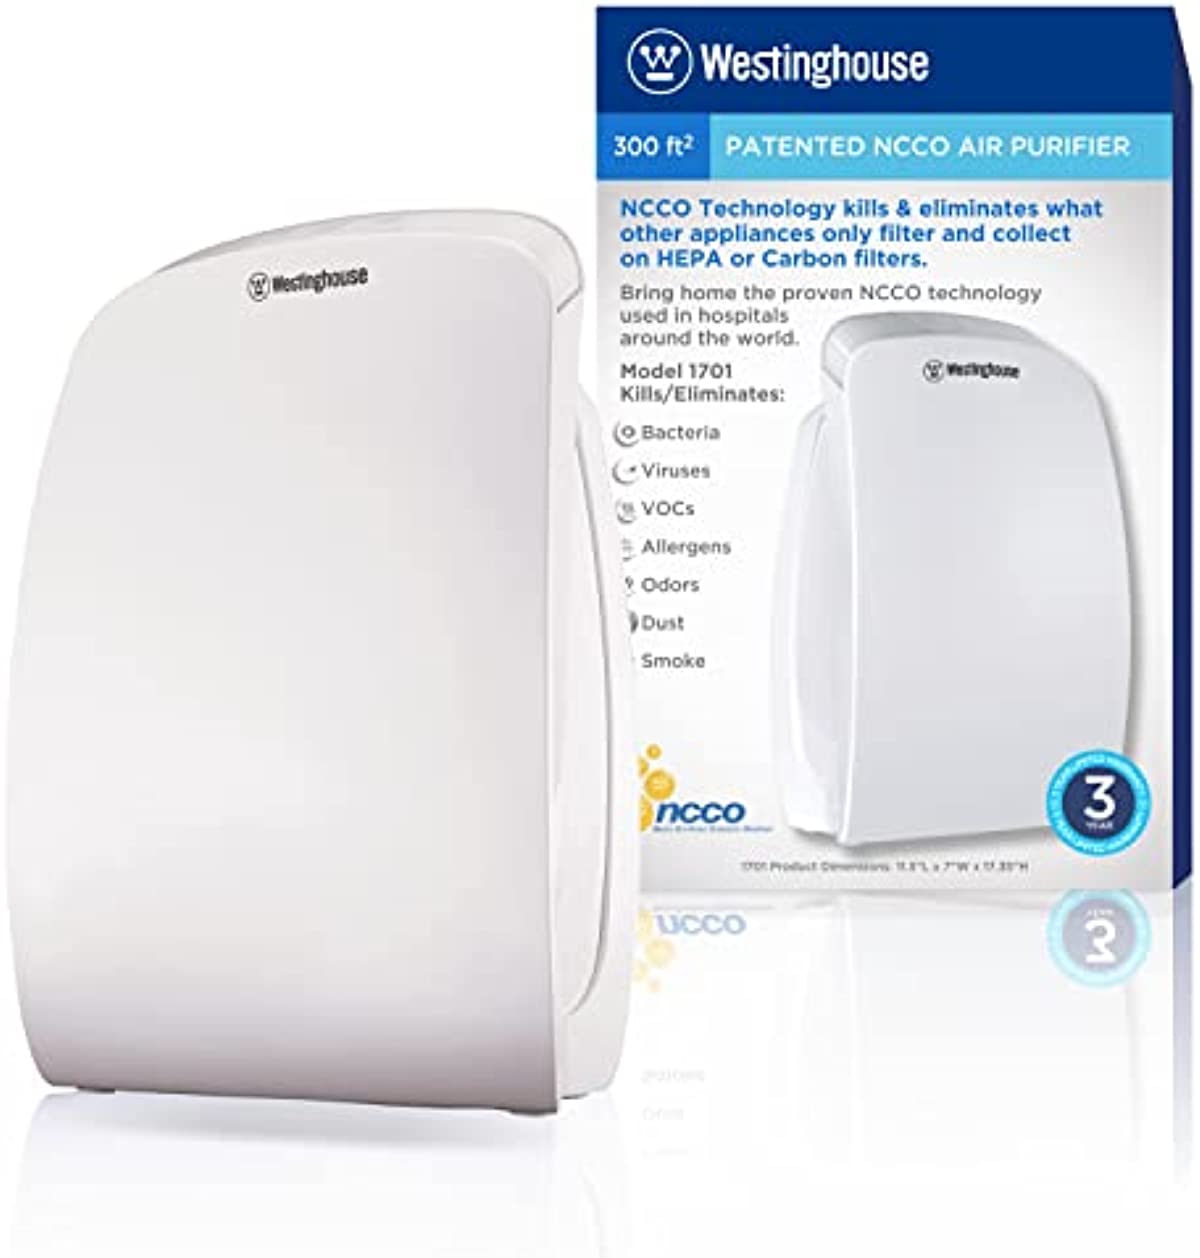 Westinghouse 1701 HEPA Air Purifier with Patented Medical Grade NCCO Technology for Home, Eliminates & Kills Bacteria and Viruses, Filters Dust, Pet Dander, Odor, Allergies, Smoke – Ideal for Medium to Large Rooms, Office, Kitchen, Bedroom